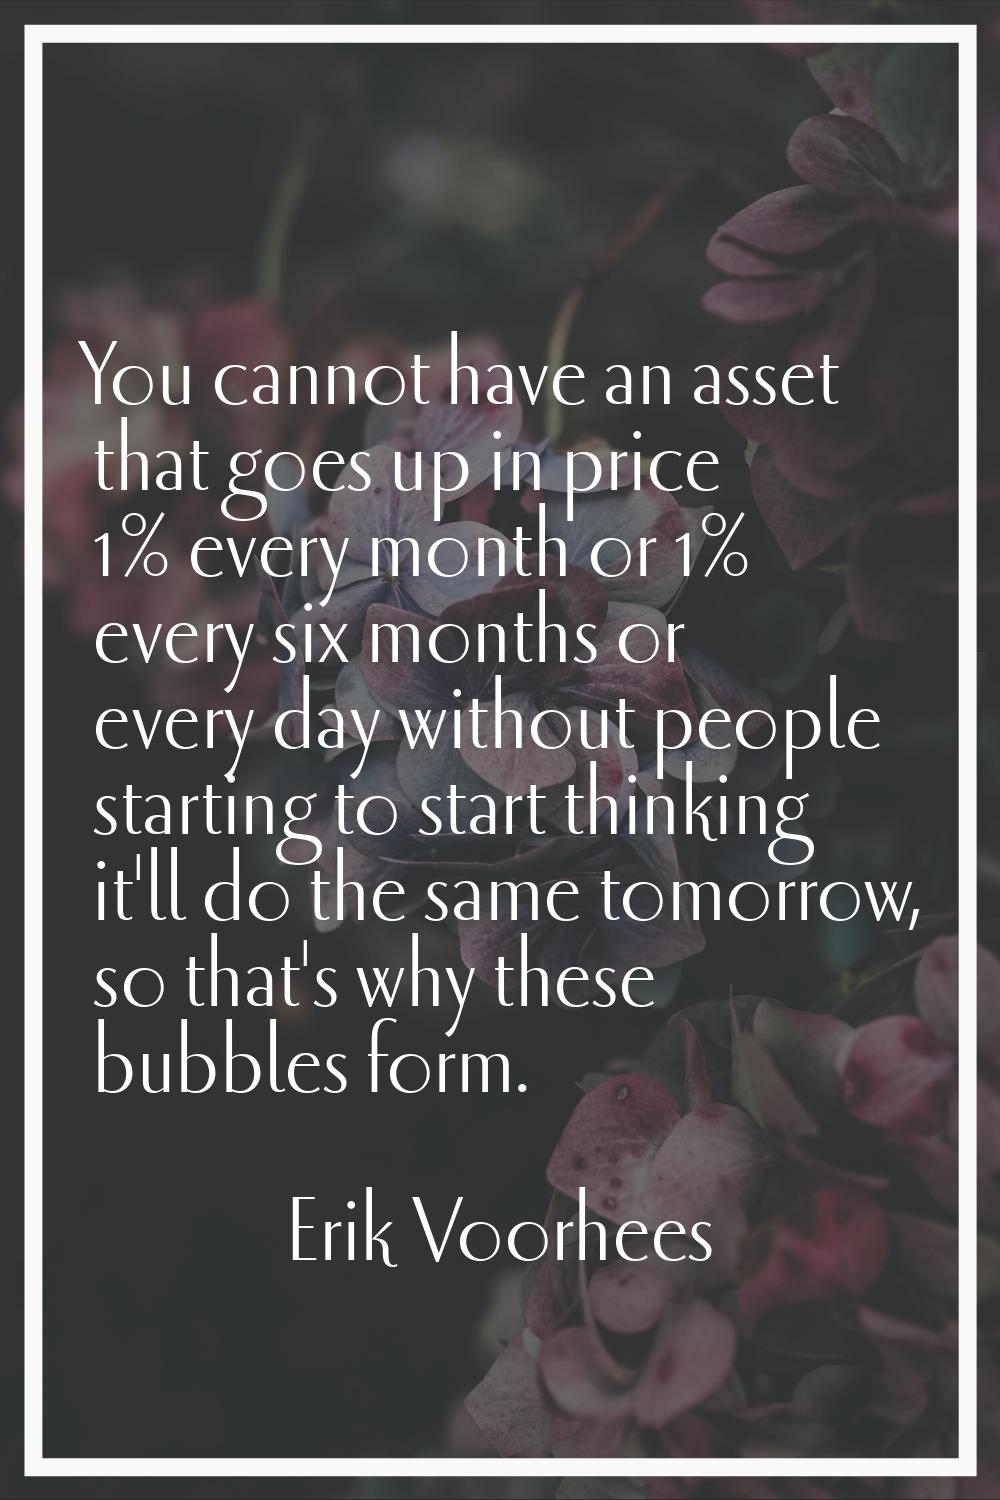 You cannot have an asset that goes up in price 1% every month or 1% every six months or every day w